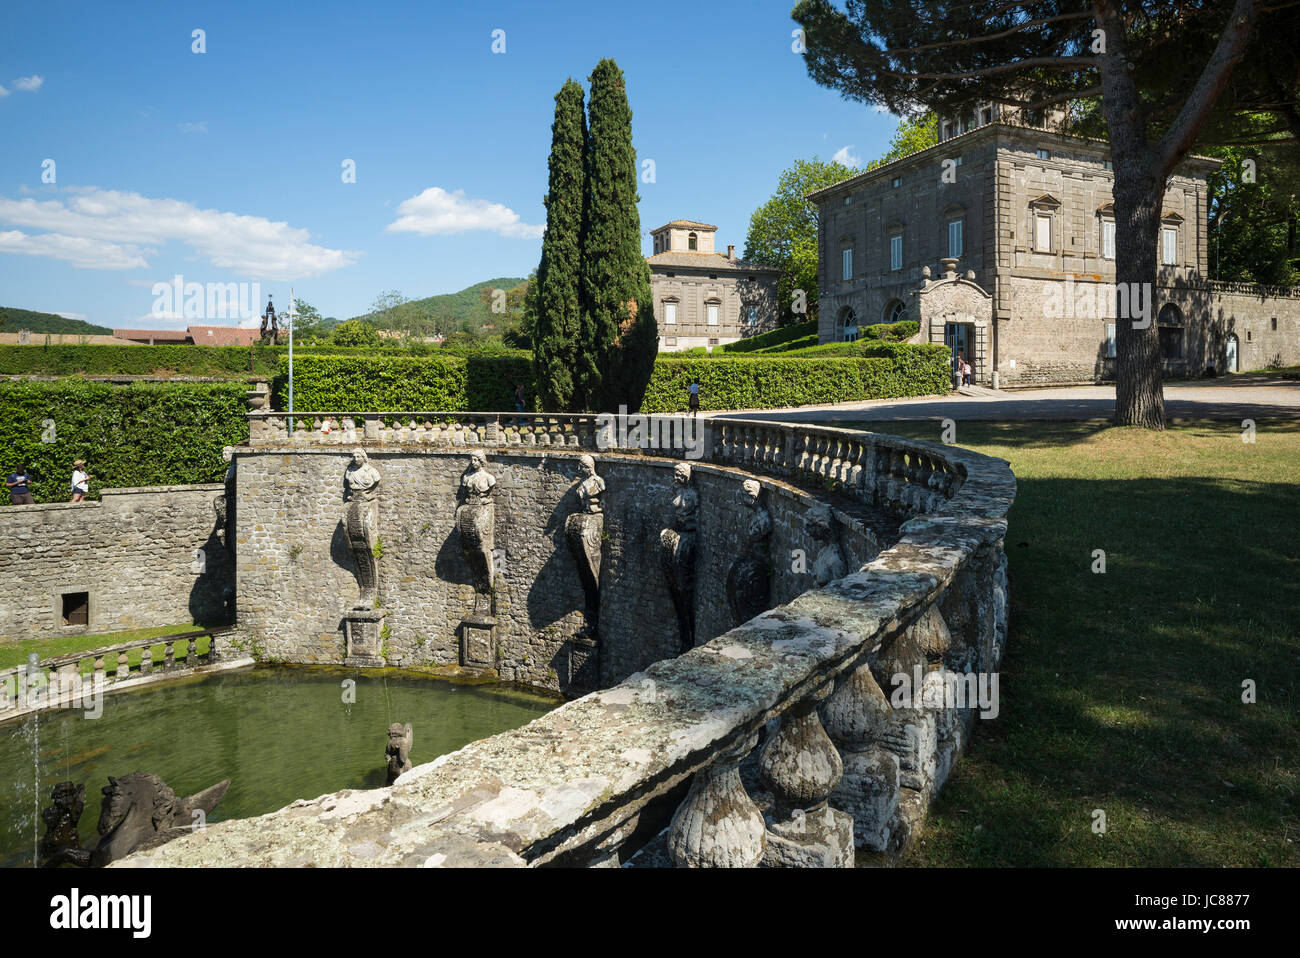 Bagnaia. Viterbo. Italy. Fountain of Pegasus and the 16th century Mannerist style Villa Lante, commissioned by Cardinal Gianfrancesco Gambara. Stock Photo